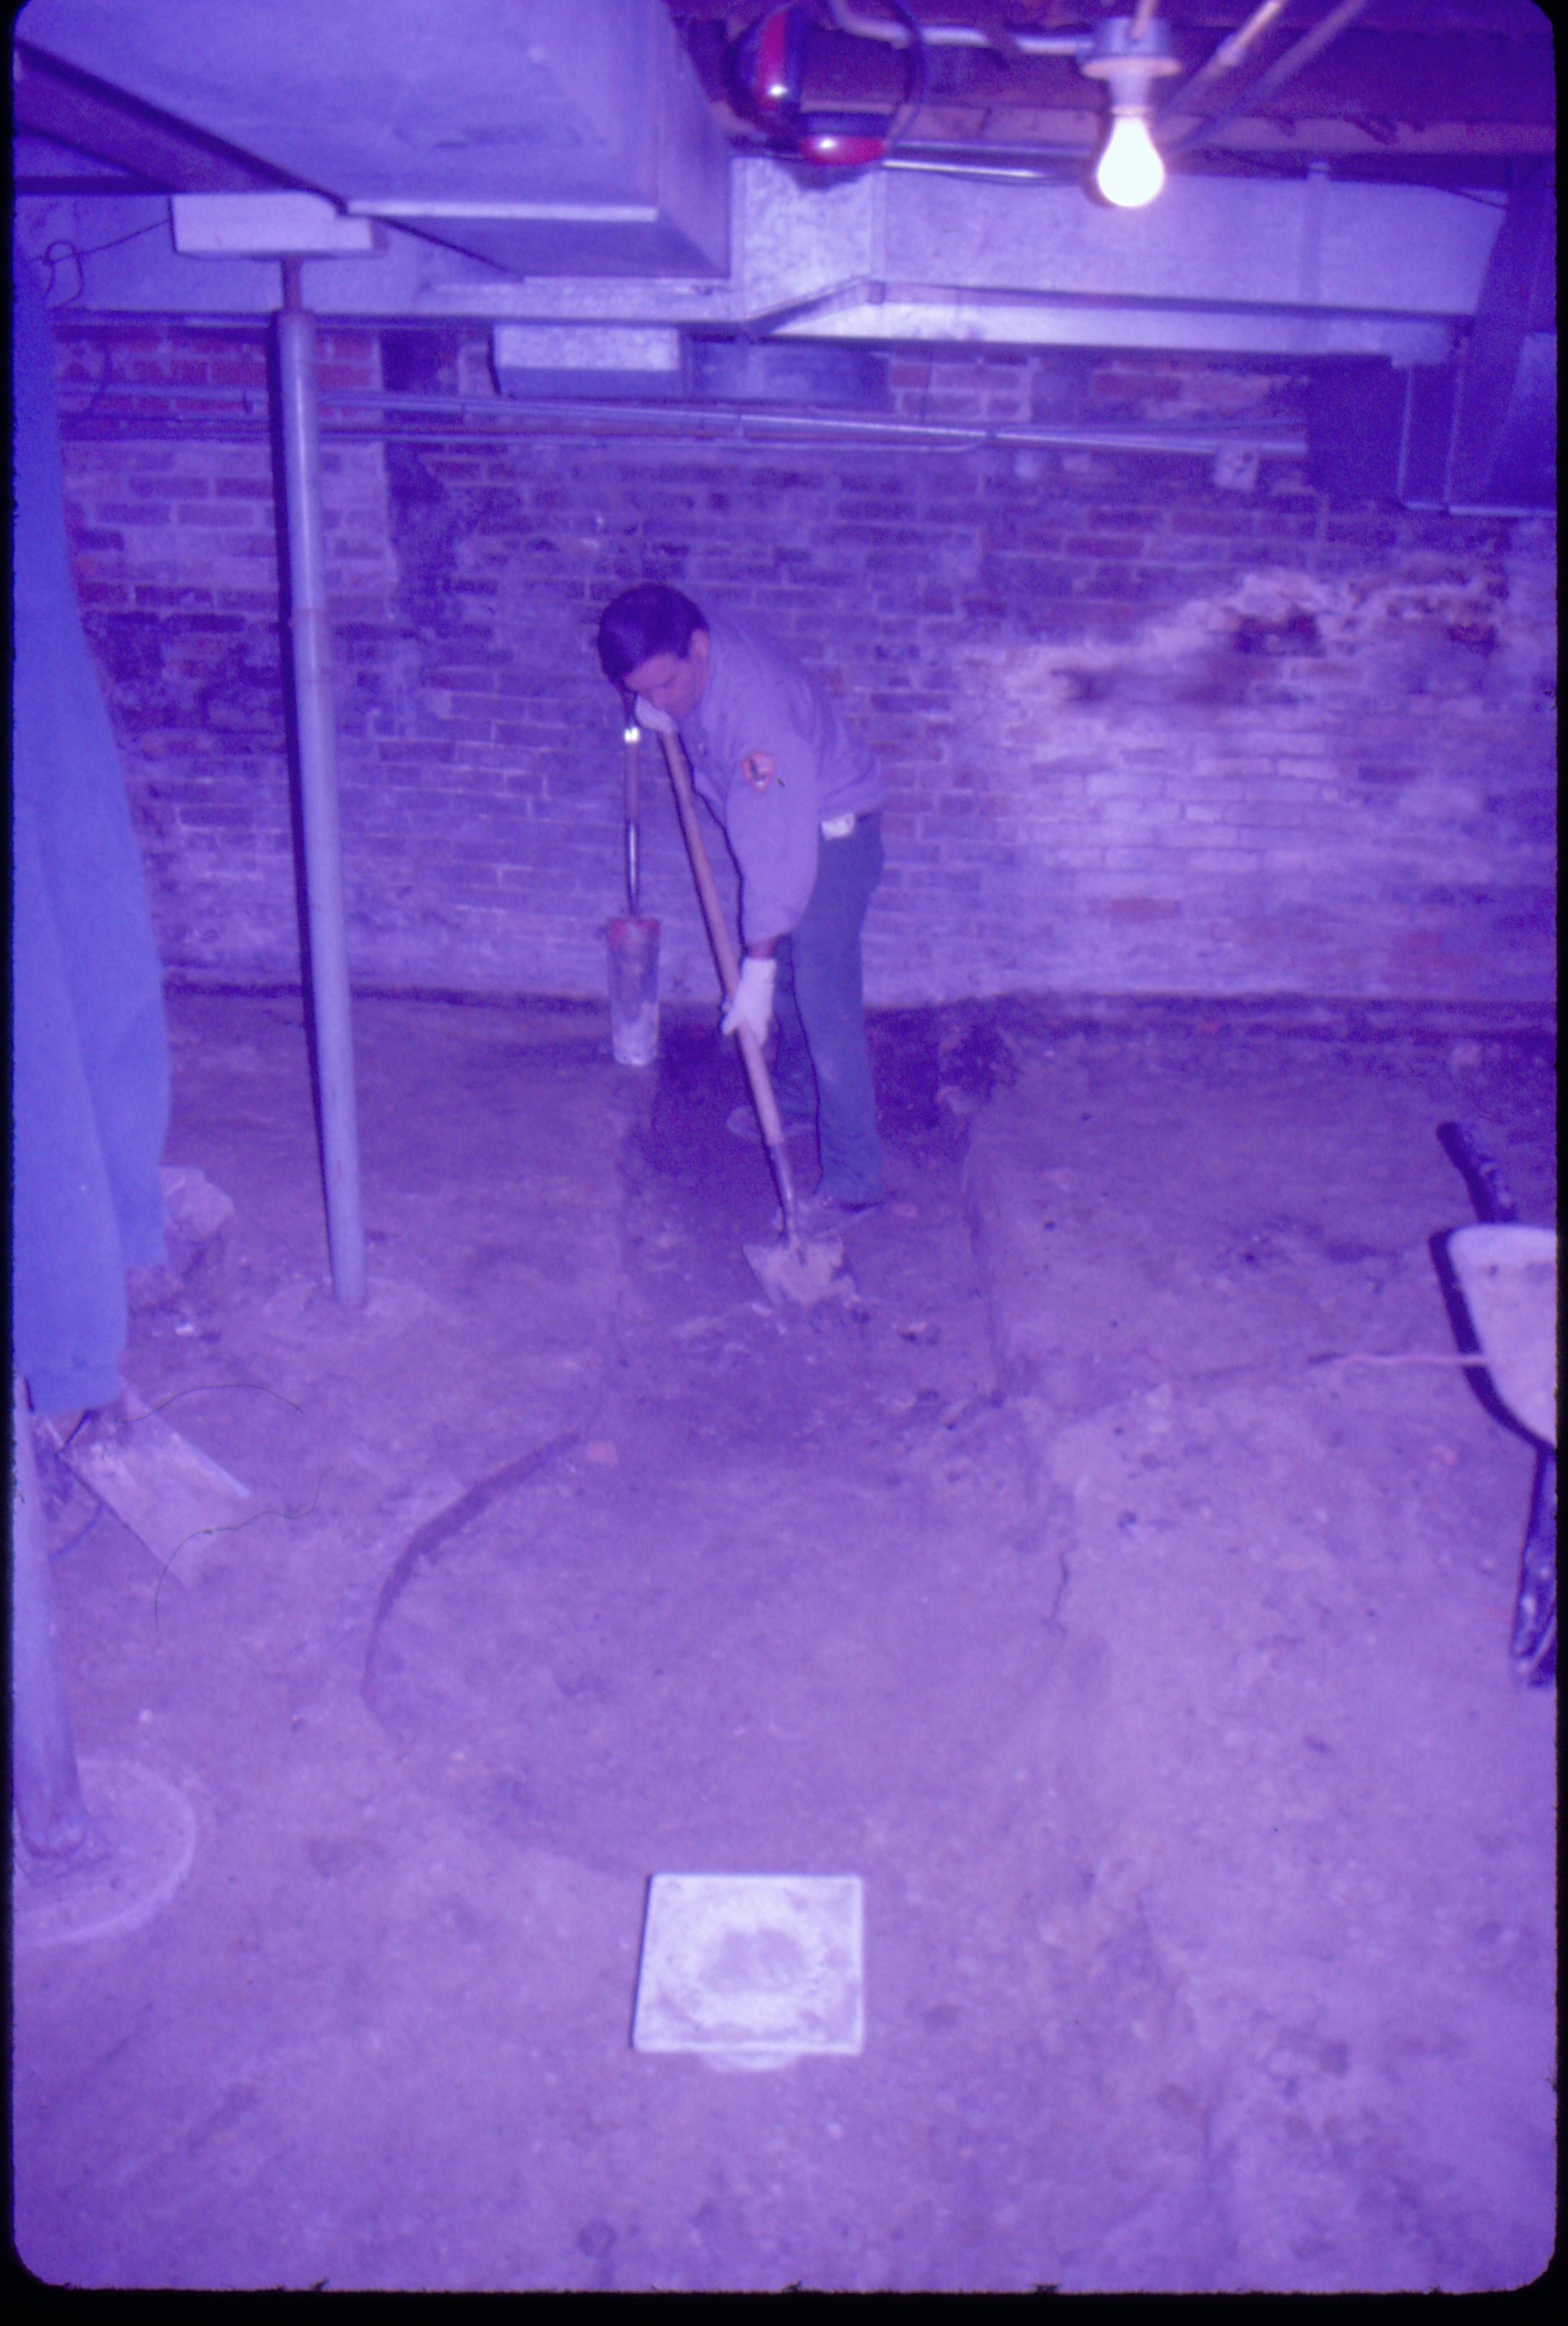 Lyon House - basement, Brick-lined cistern (or gravity furnace) remnants. Maintenance Worker Tom Pacha digs out part of basement floor to find full extent of brick-lined utilities. Metal supports on left, duct work overhead, square drain cover in foreground. Brick wall in background. Looking North in basement Lyon, Basement, cistern, brick wall, staff, duct work, utilities